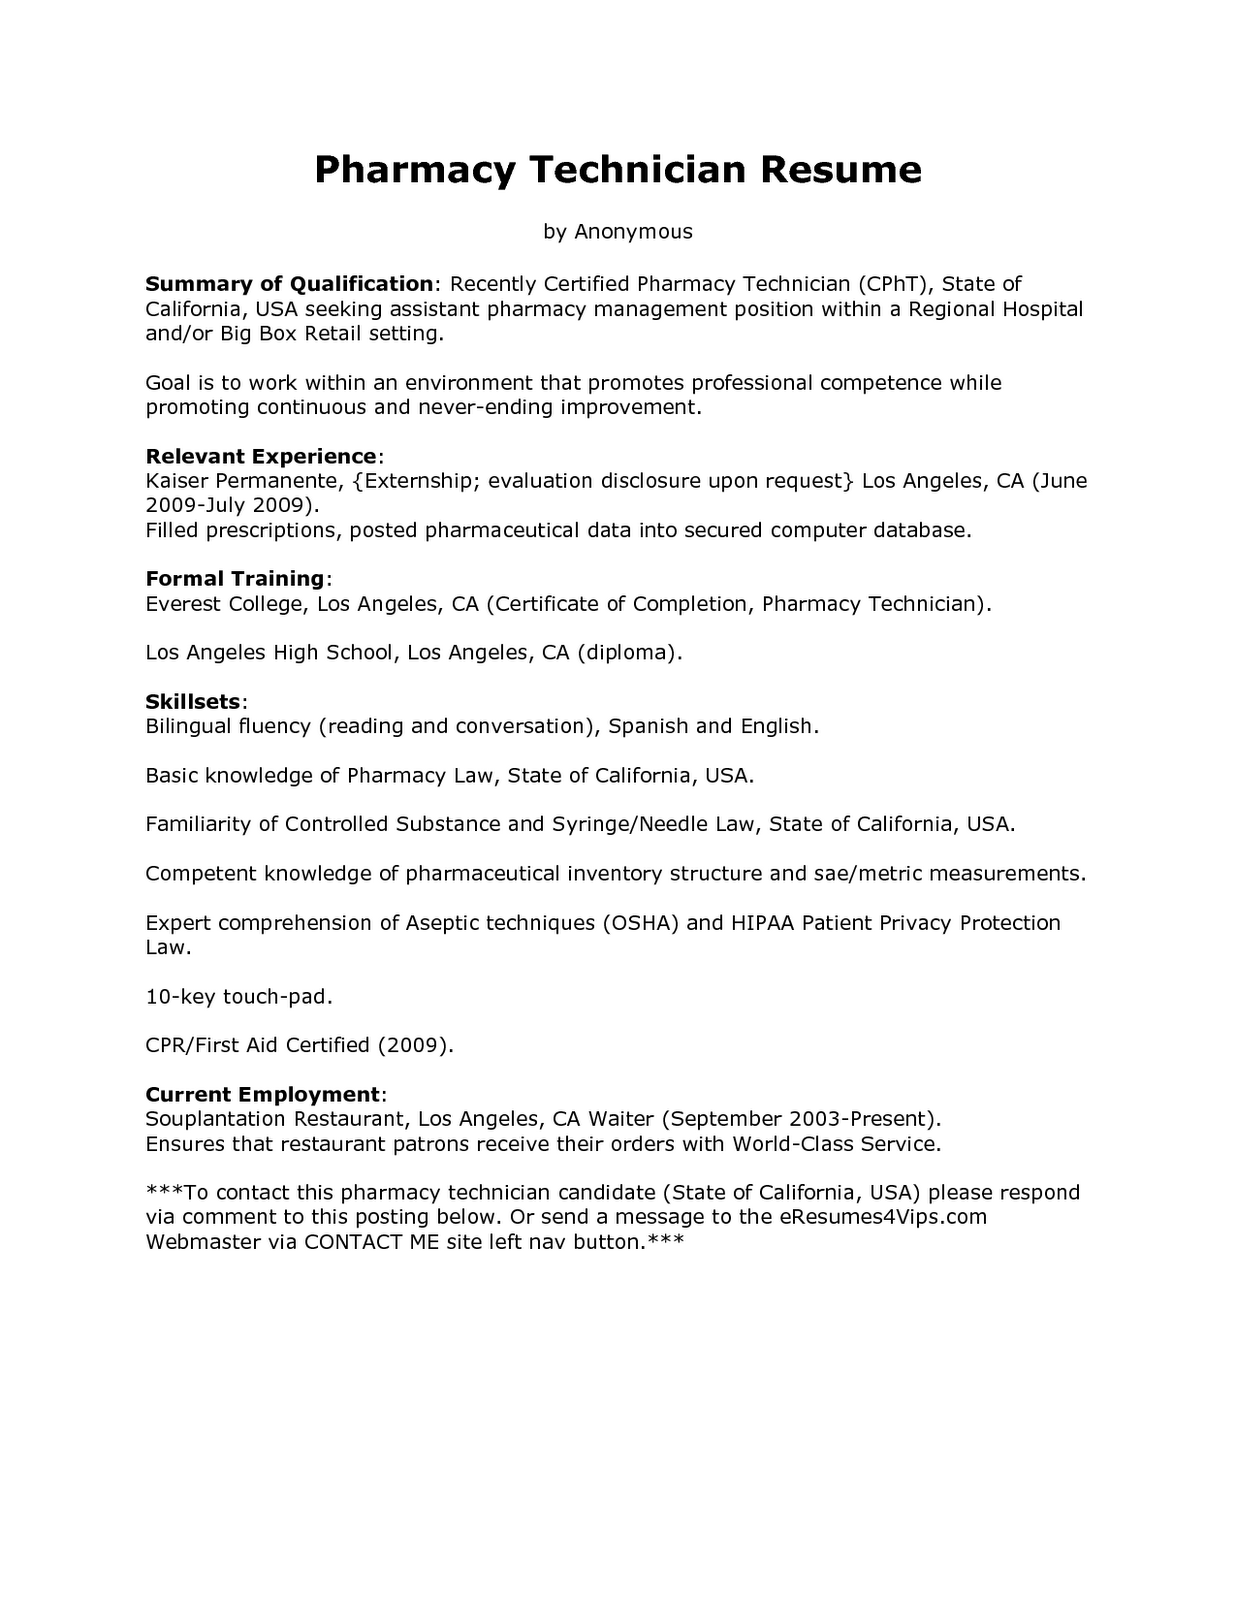 Resume electonically